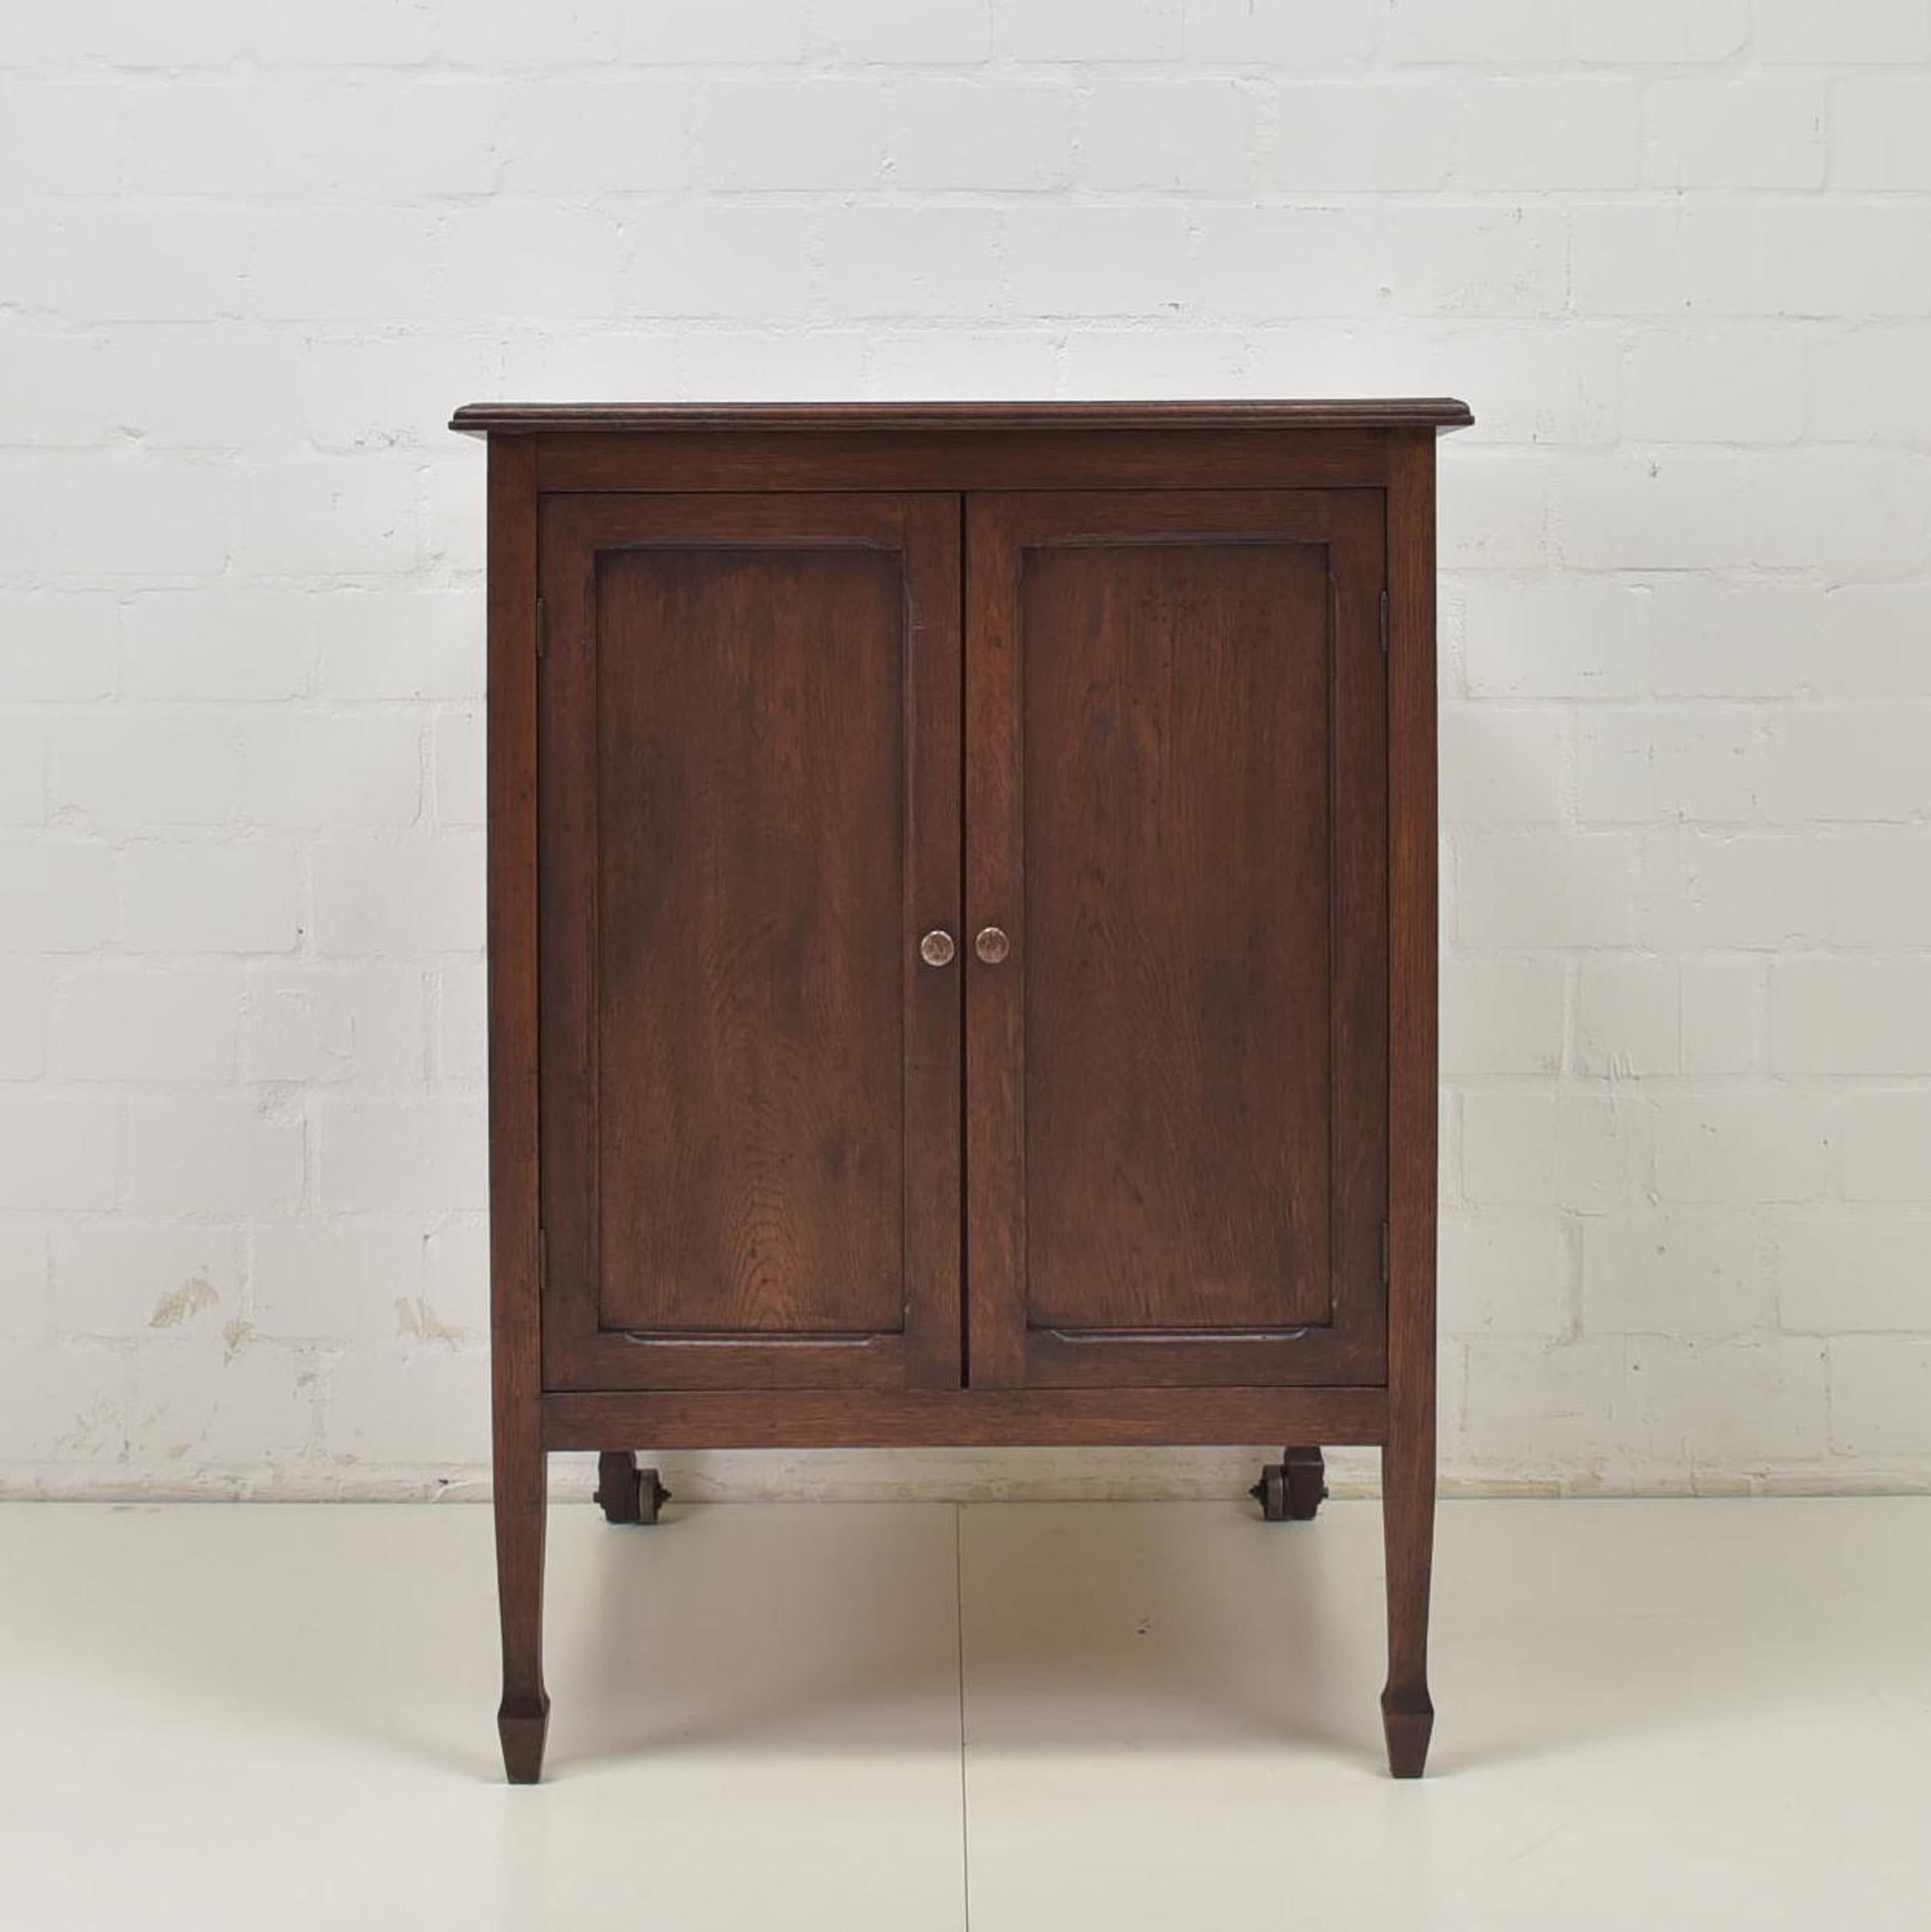 Office cabinet that can be used on 3 sides restores Bauhaus oak records

Features:
Two-door front, one door each on the right and left
Numerous storage compartments inside
Compartment width front 30.8 cm each, compartment width sides 31.5